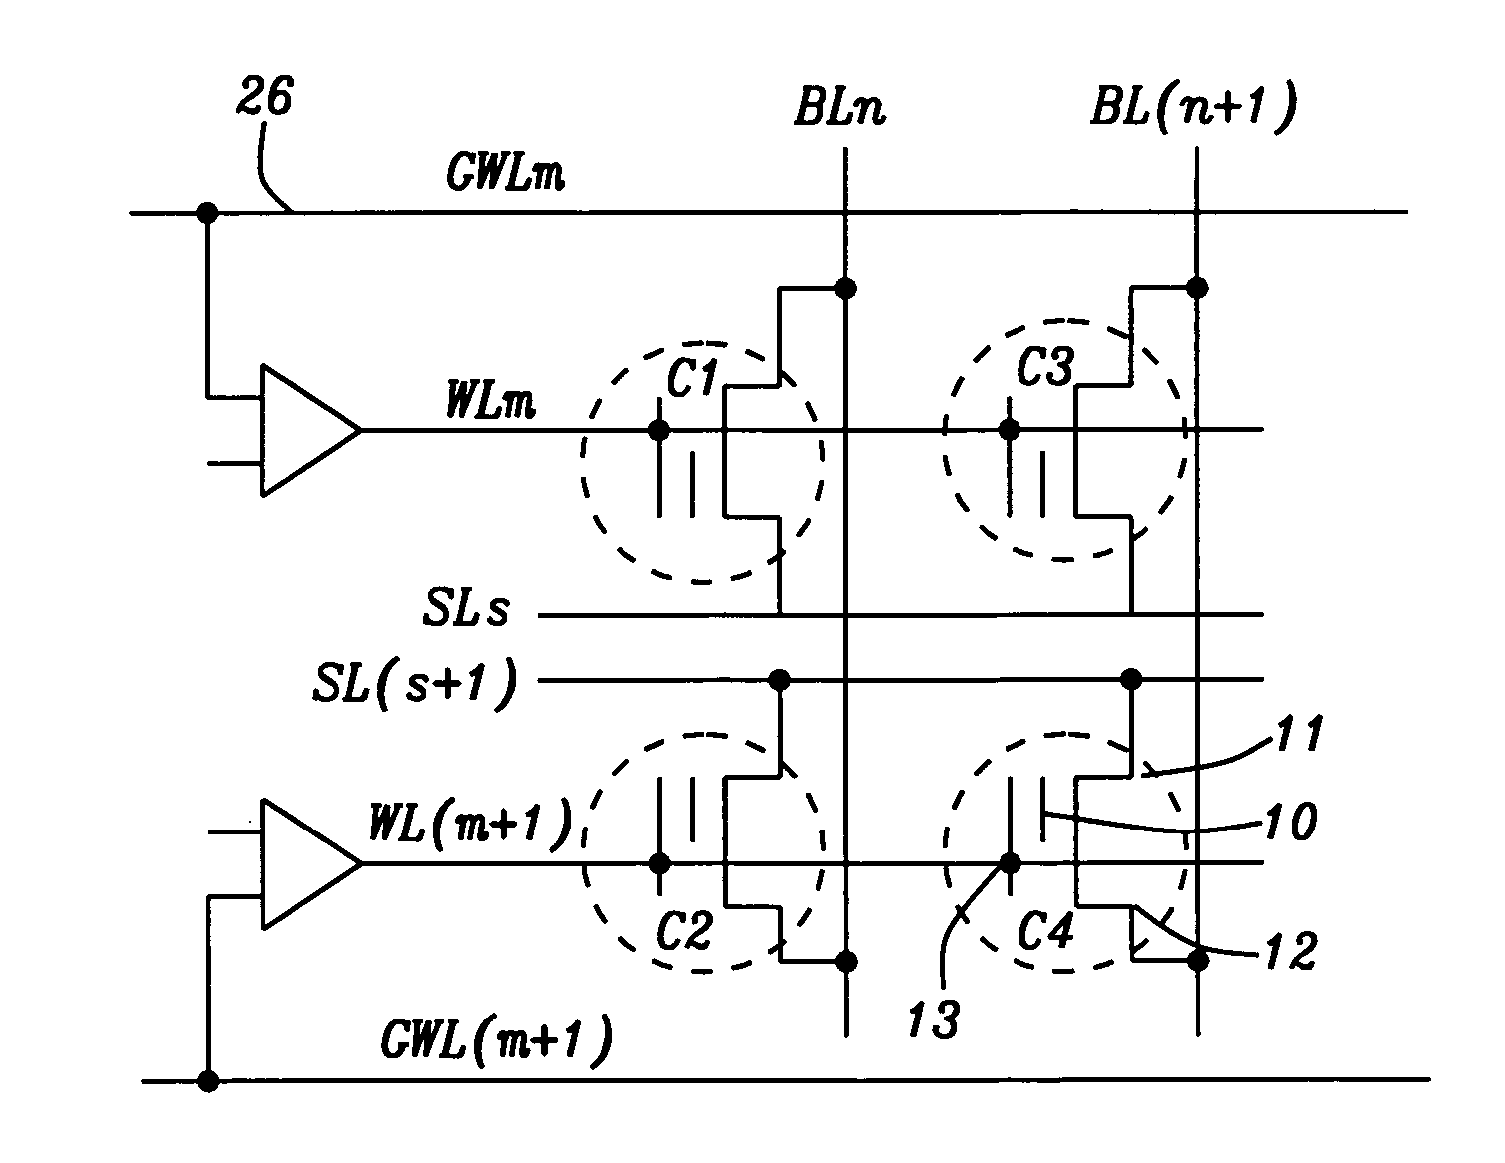 Array structure of two-transistor cells with merged floating gates for byte erase and re-write if disturbed algorithm